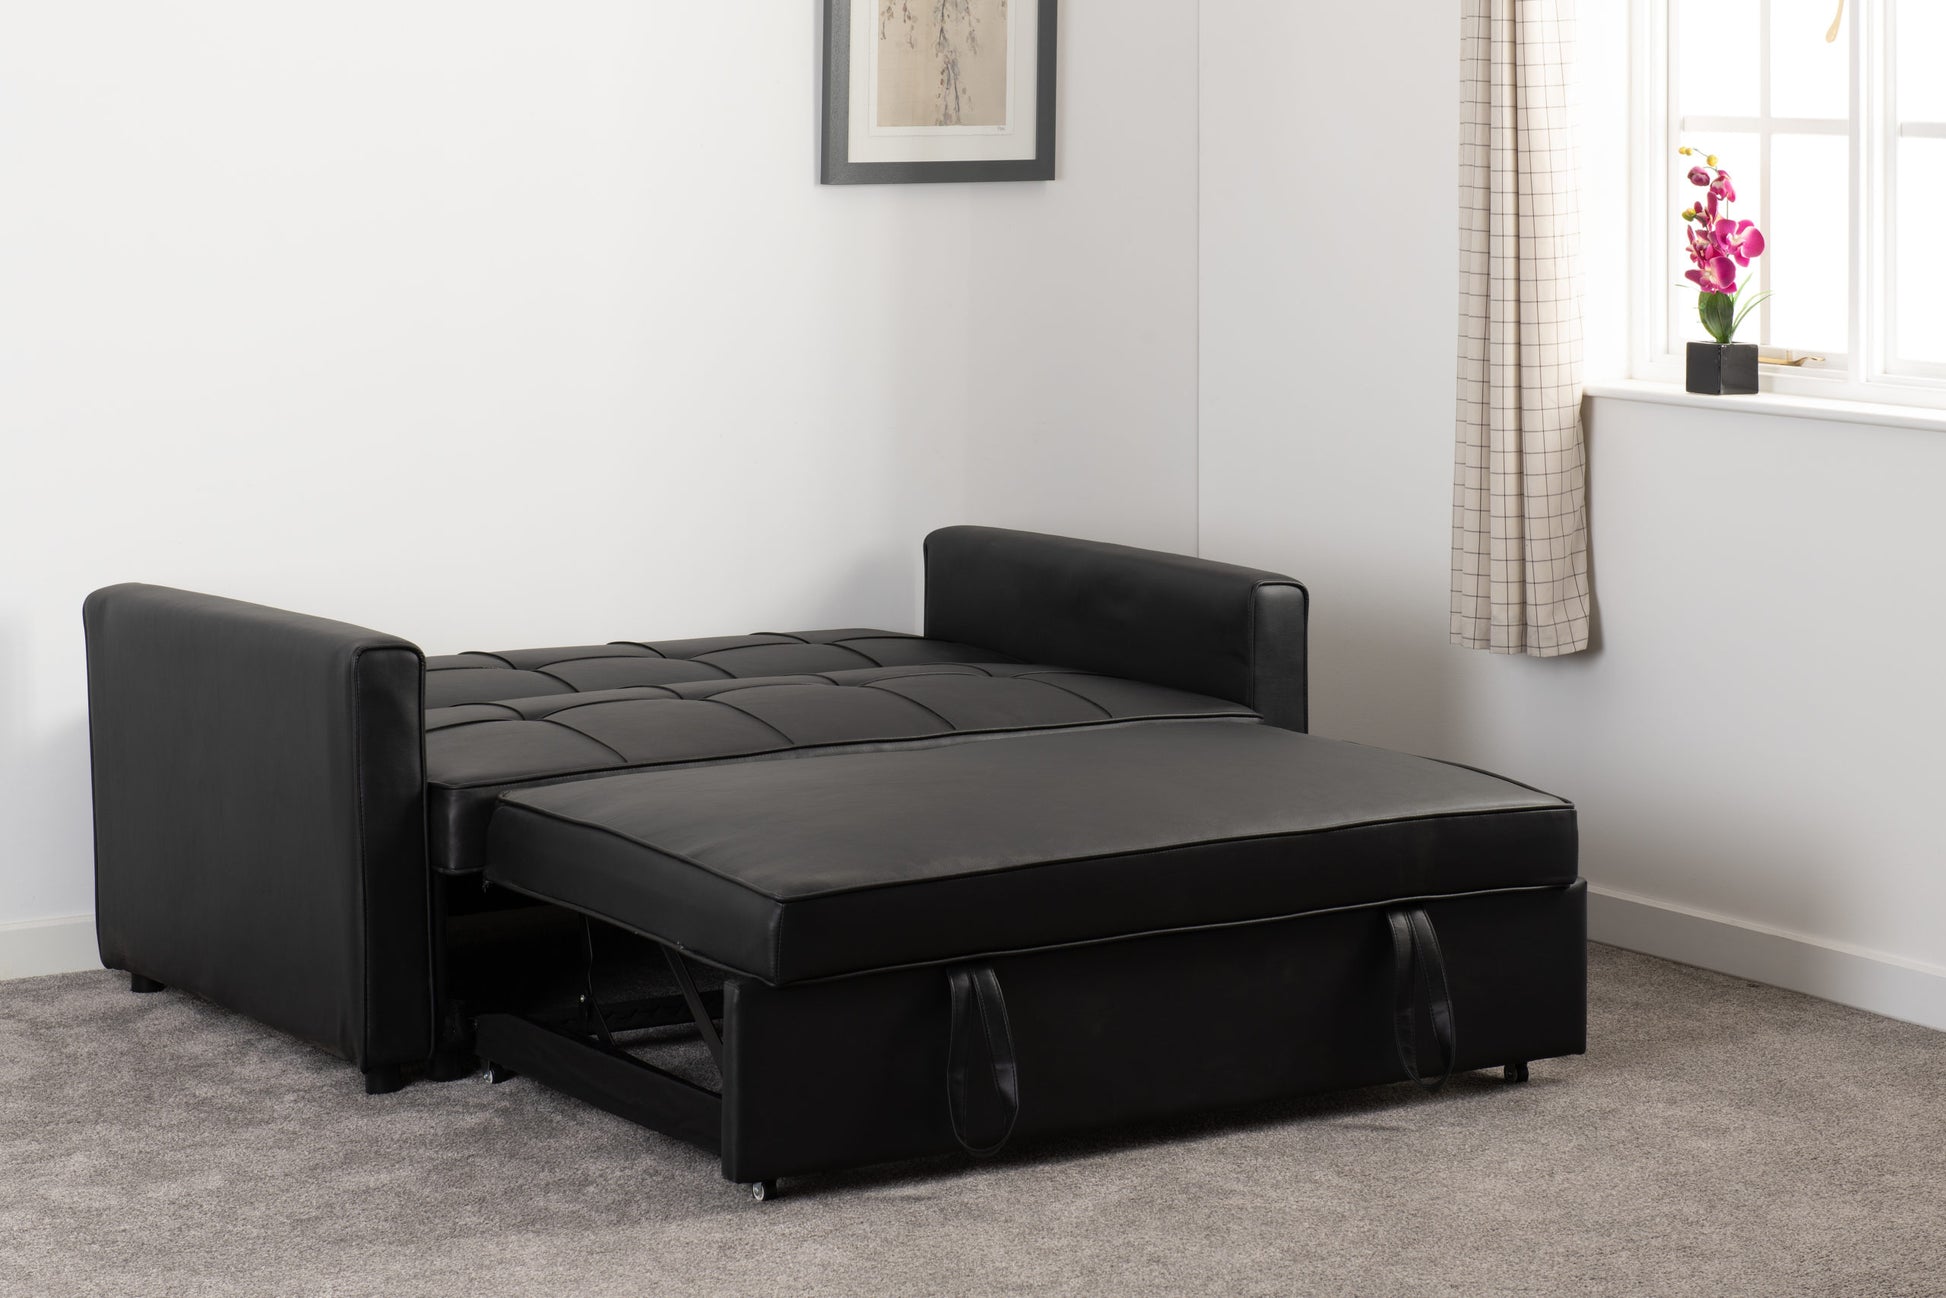 Astoria Sofa Bed - Black Faux Leather - The Right Buy Store